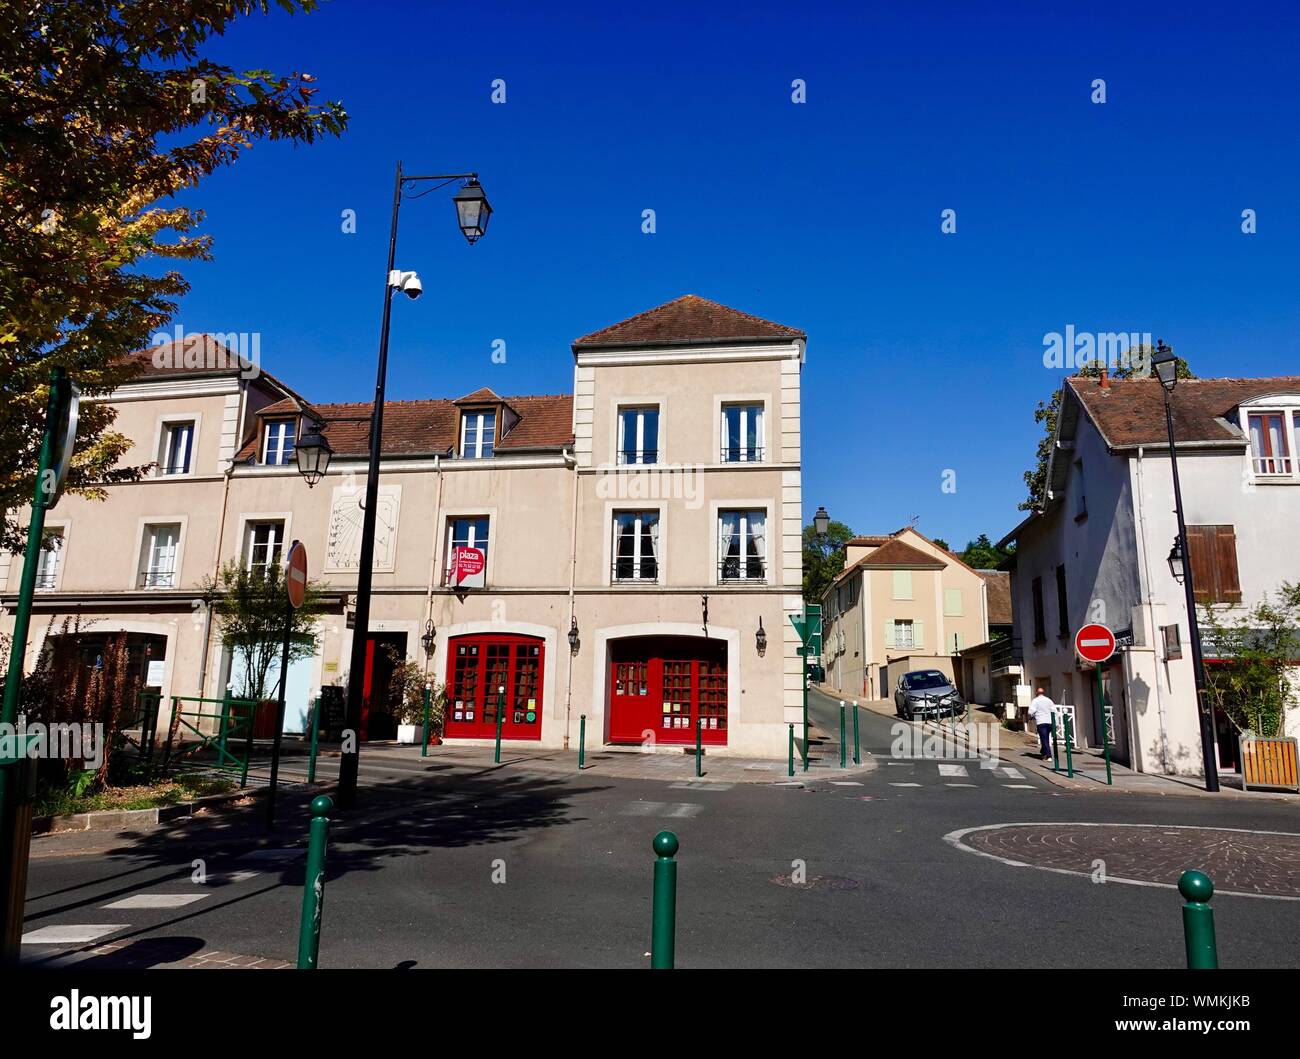 Streets of the small town of Andrésy, France, located thirty miles west of Paris in the Ile-de-France, at the confluence of the rivers Seine and Oise. Stock Photo